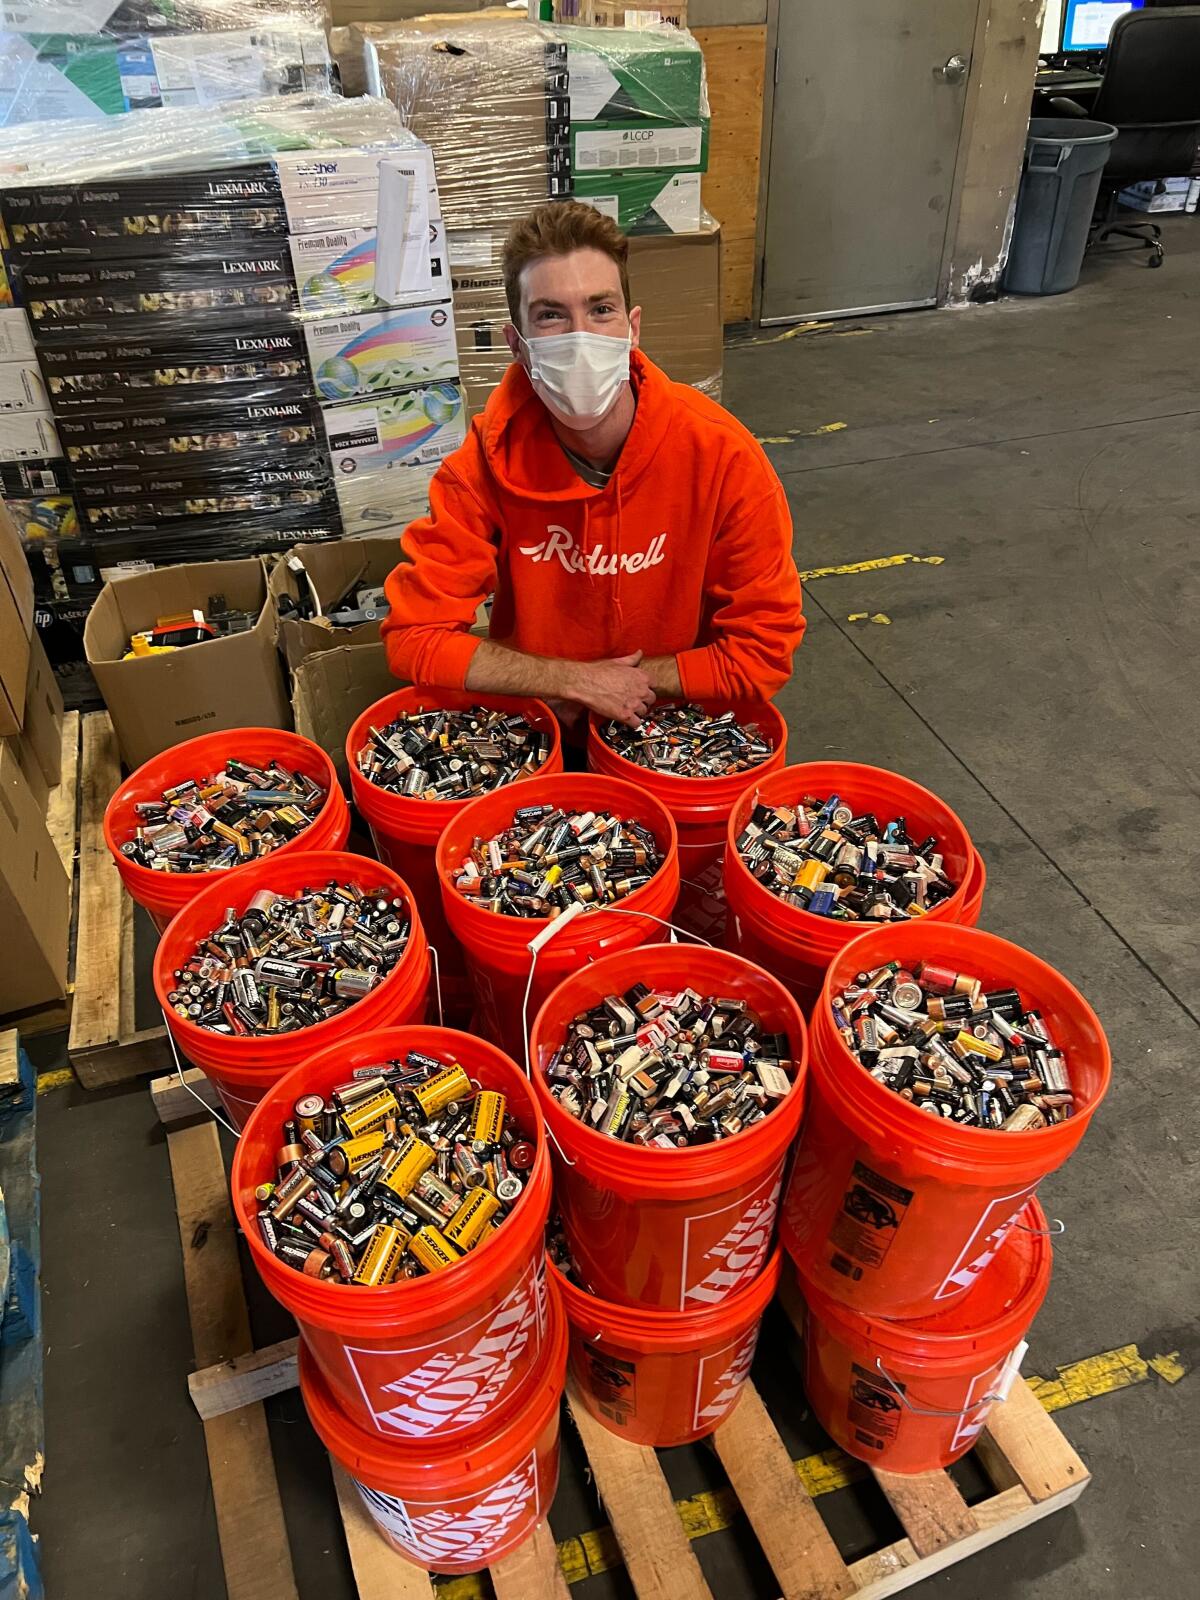 A Ridwell employee poses next to bins of batteries